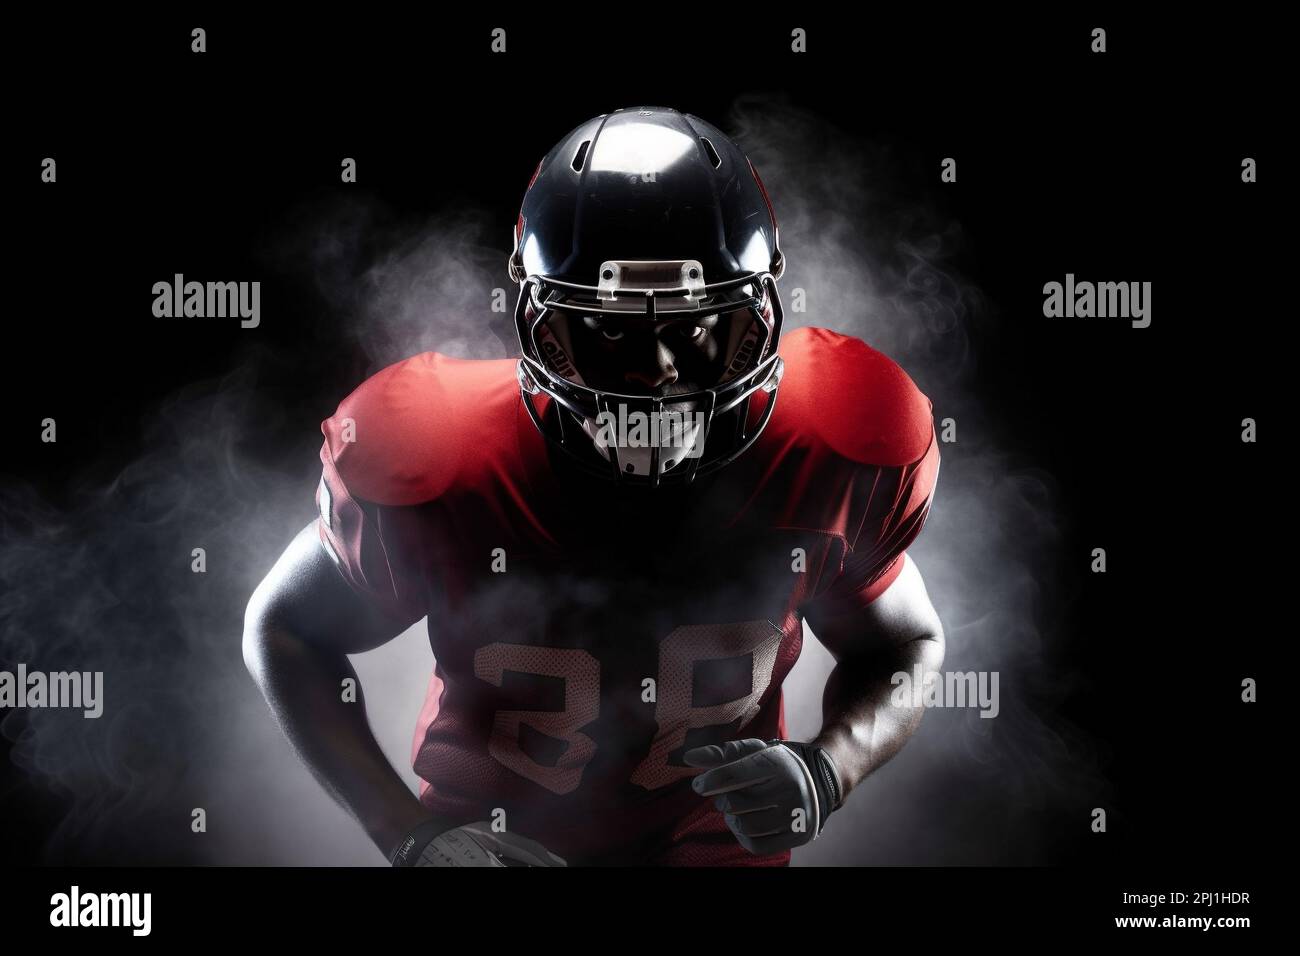 American football player on a dark background in smoke in black and red equipment Stock Photo